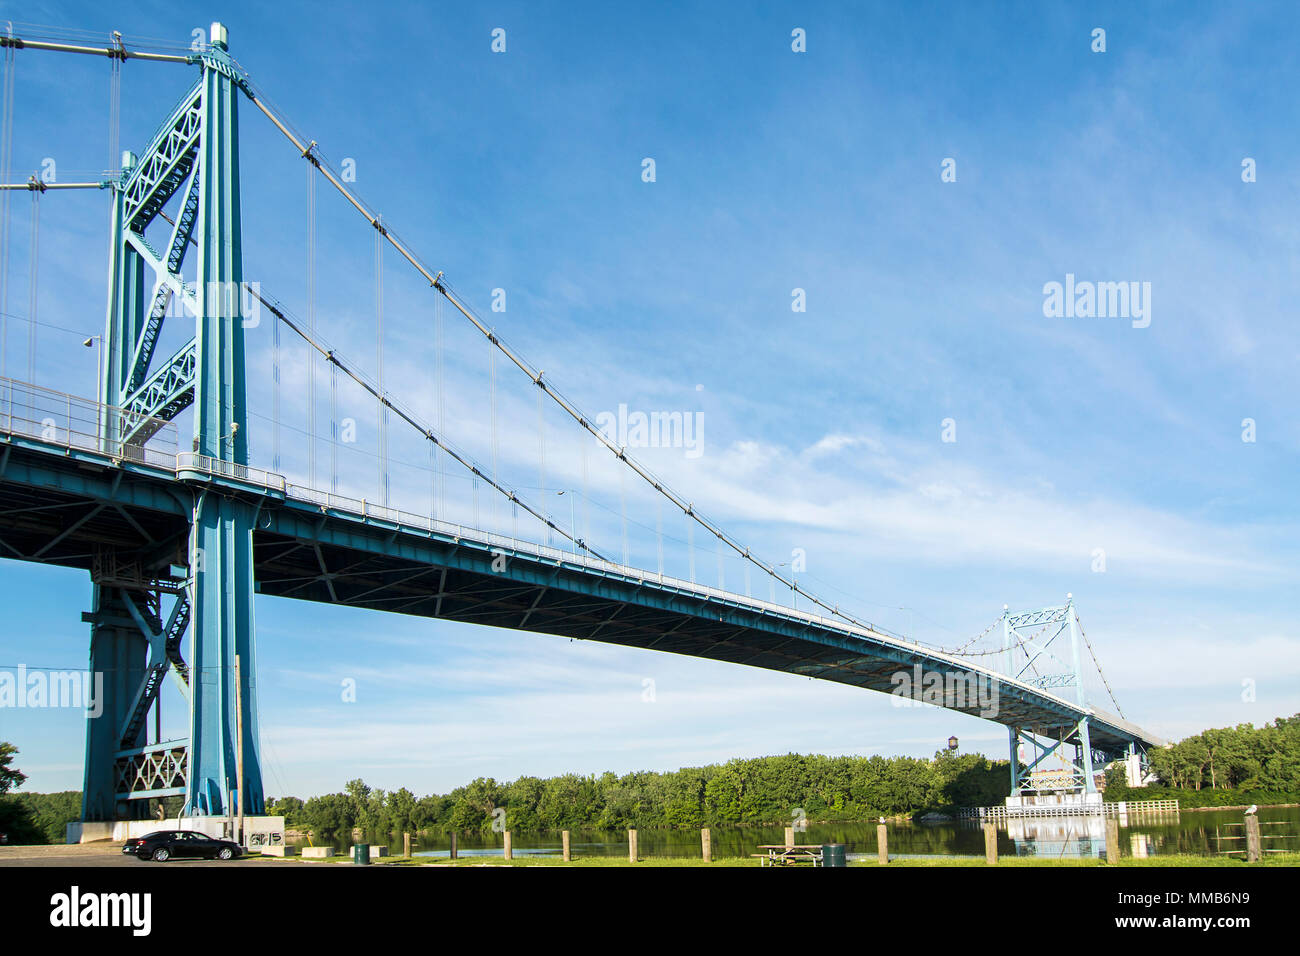 A panoramic view of downtown Toledo Ohio's Anthony Wayne Bridge or High-Level bridge that crosses the Maumee River. A beautiful blue sky with clouds. Stock Photo